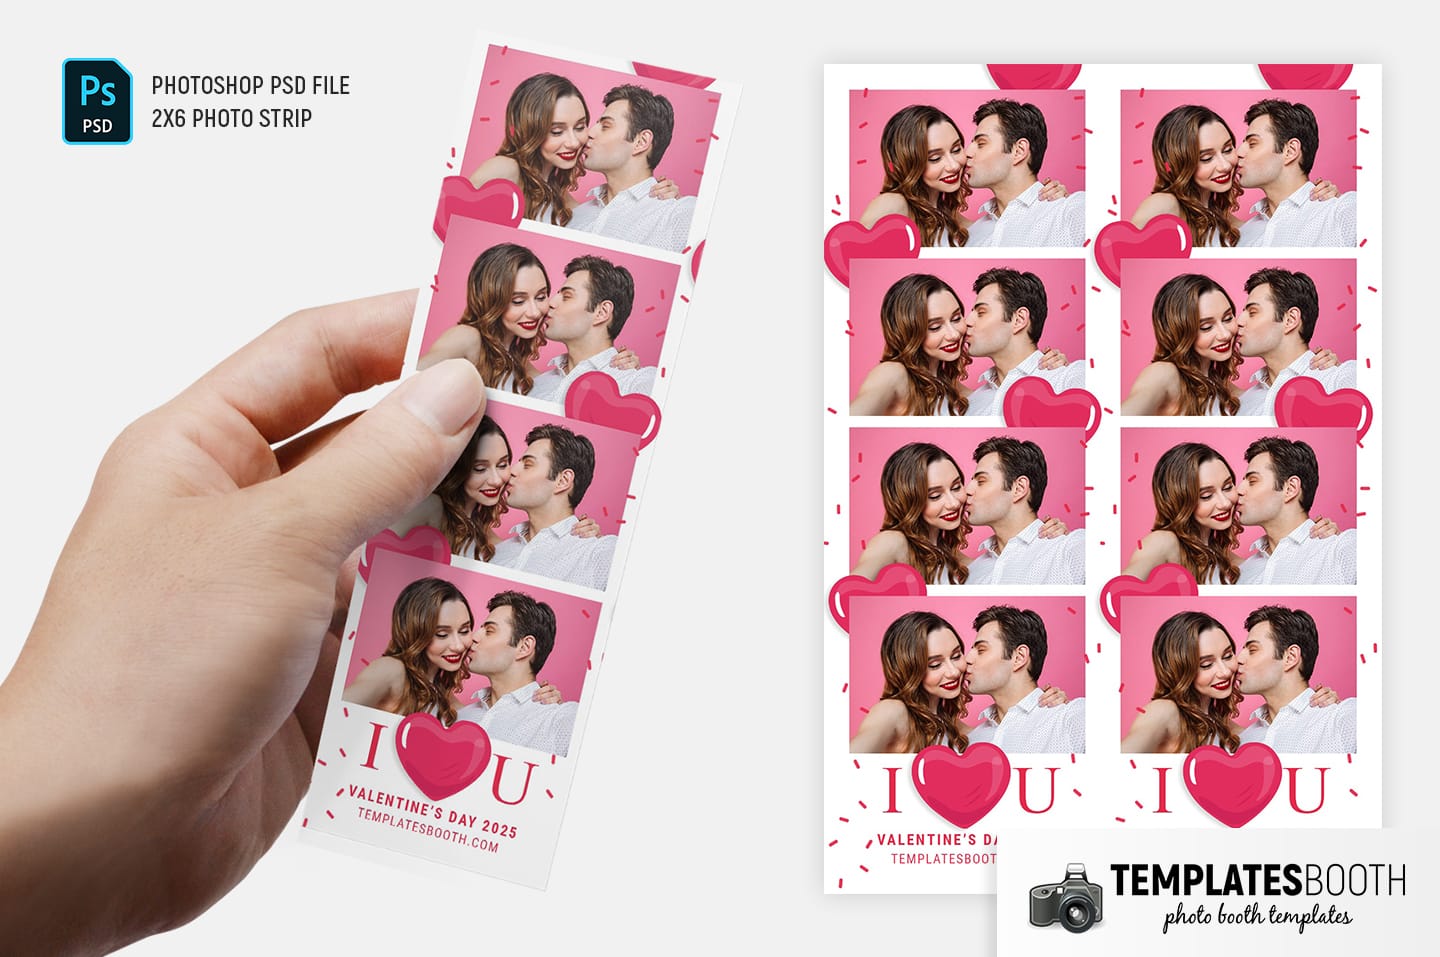 I Love You Valentine's Day Photo Booth Template (2x6 photo strip)